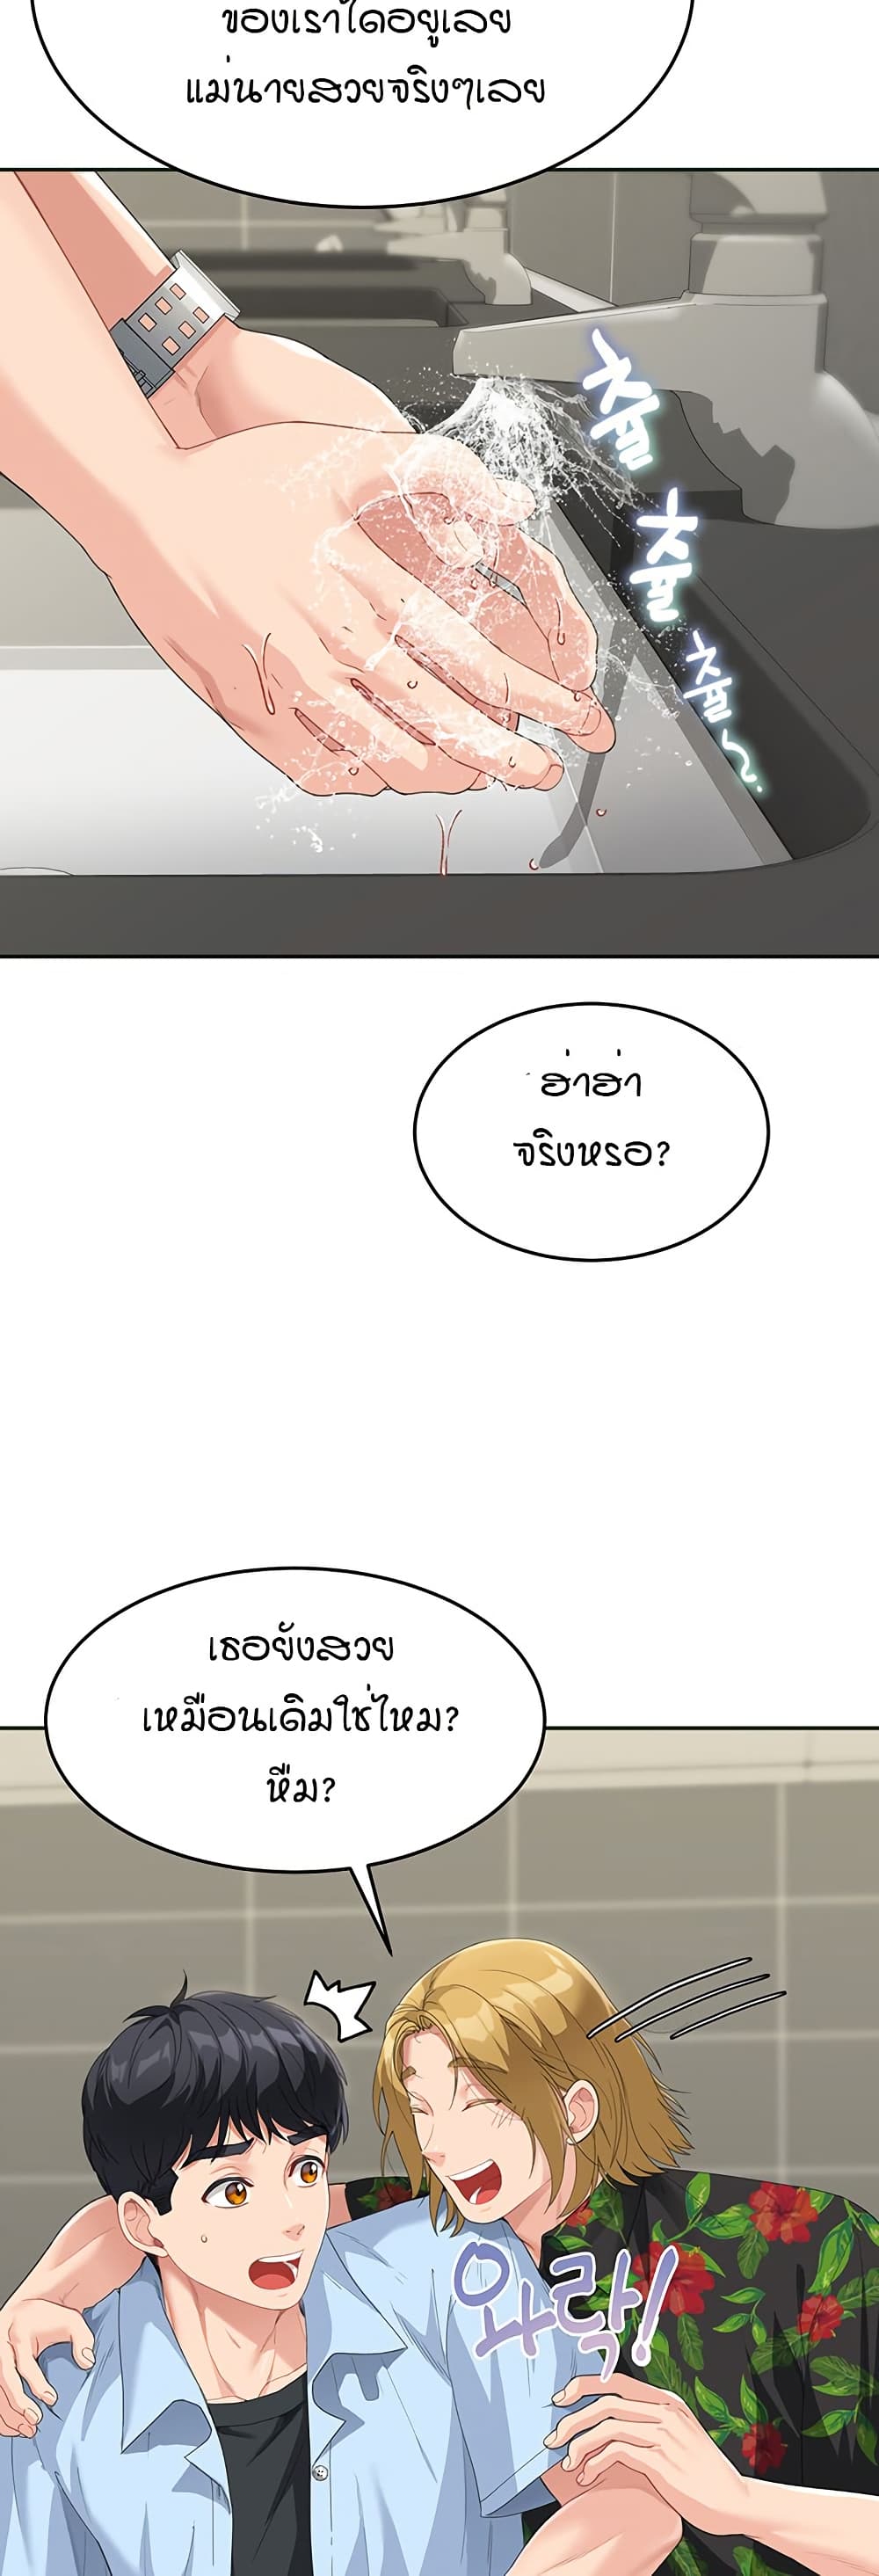 Is It Your Mother or Sister? ตอนที่ 7 ภาพ 22